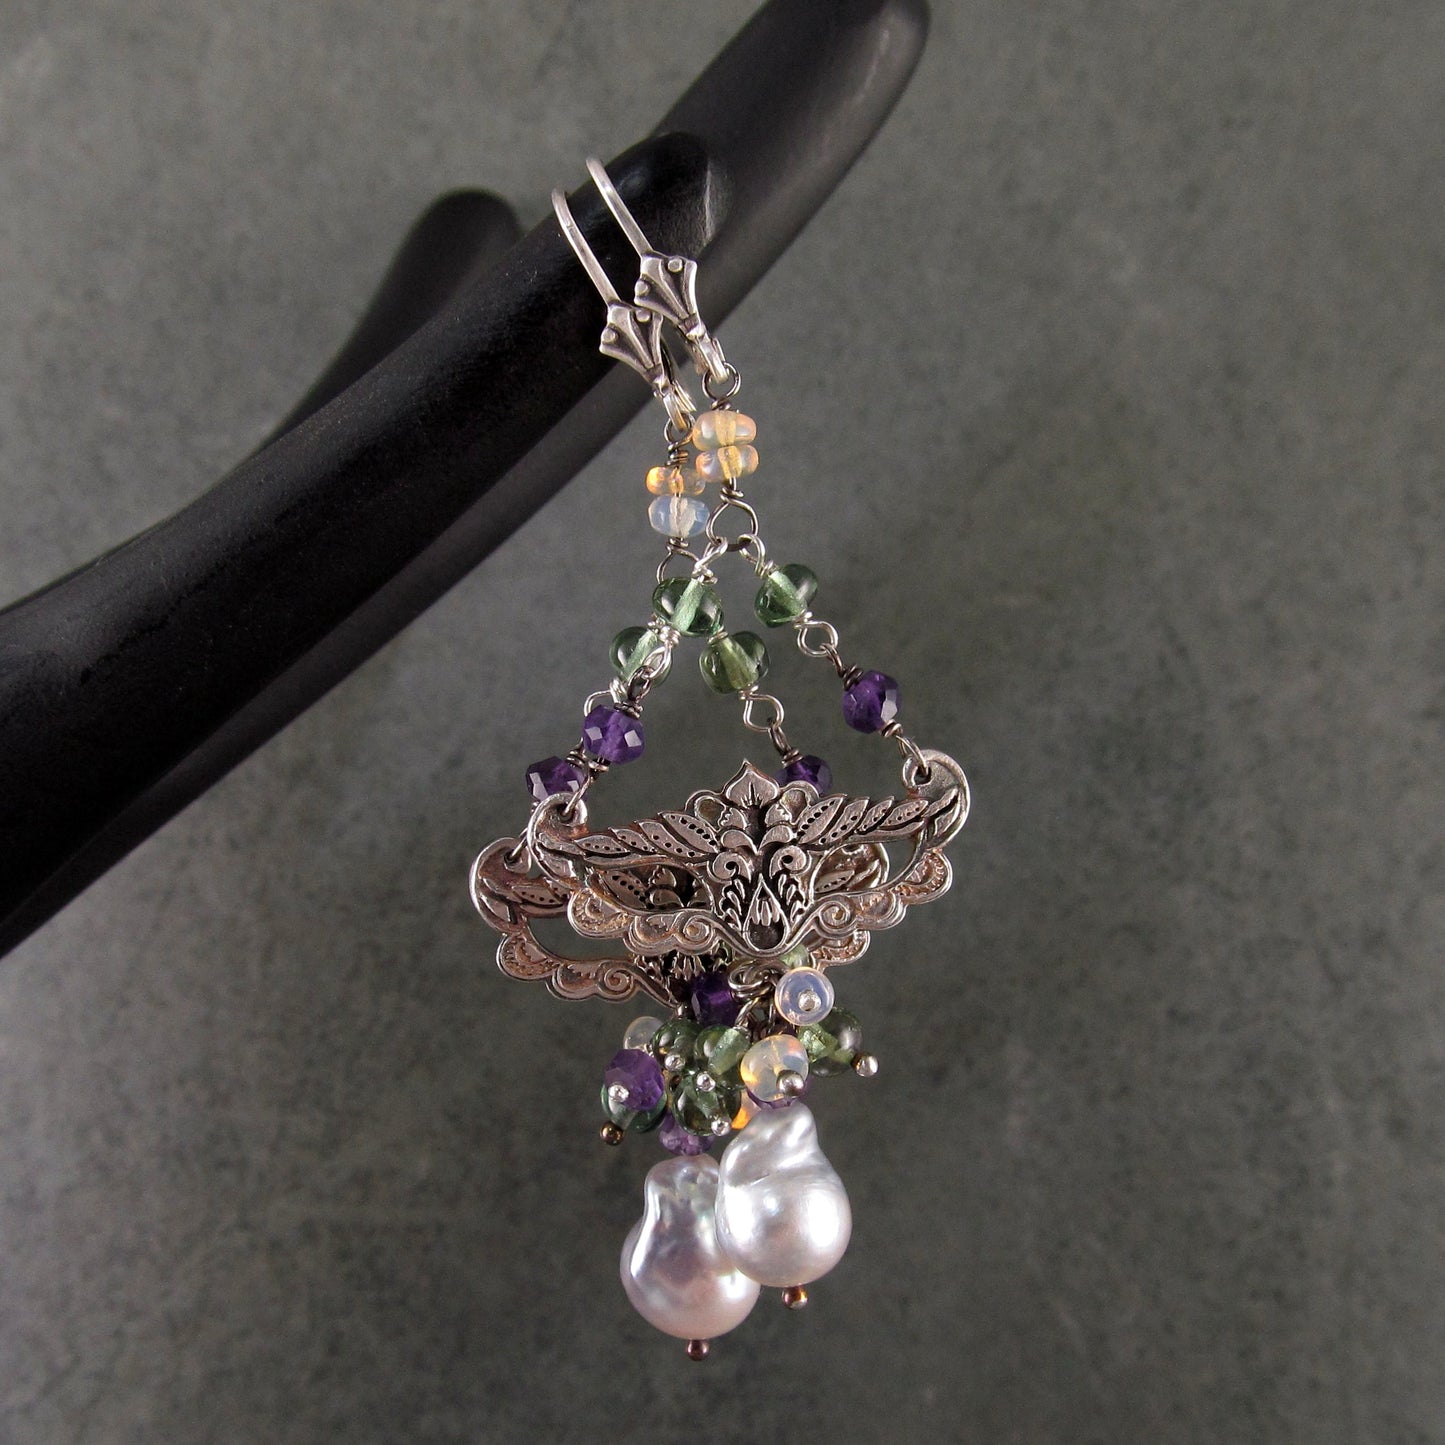 Masquerade earrings, handmade recycled fine silver, amethyst, green apatite and silver Akoya saltwater pearl earrings-Mardi Gras Masque